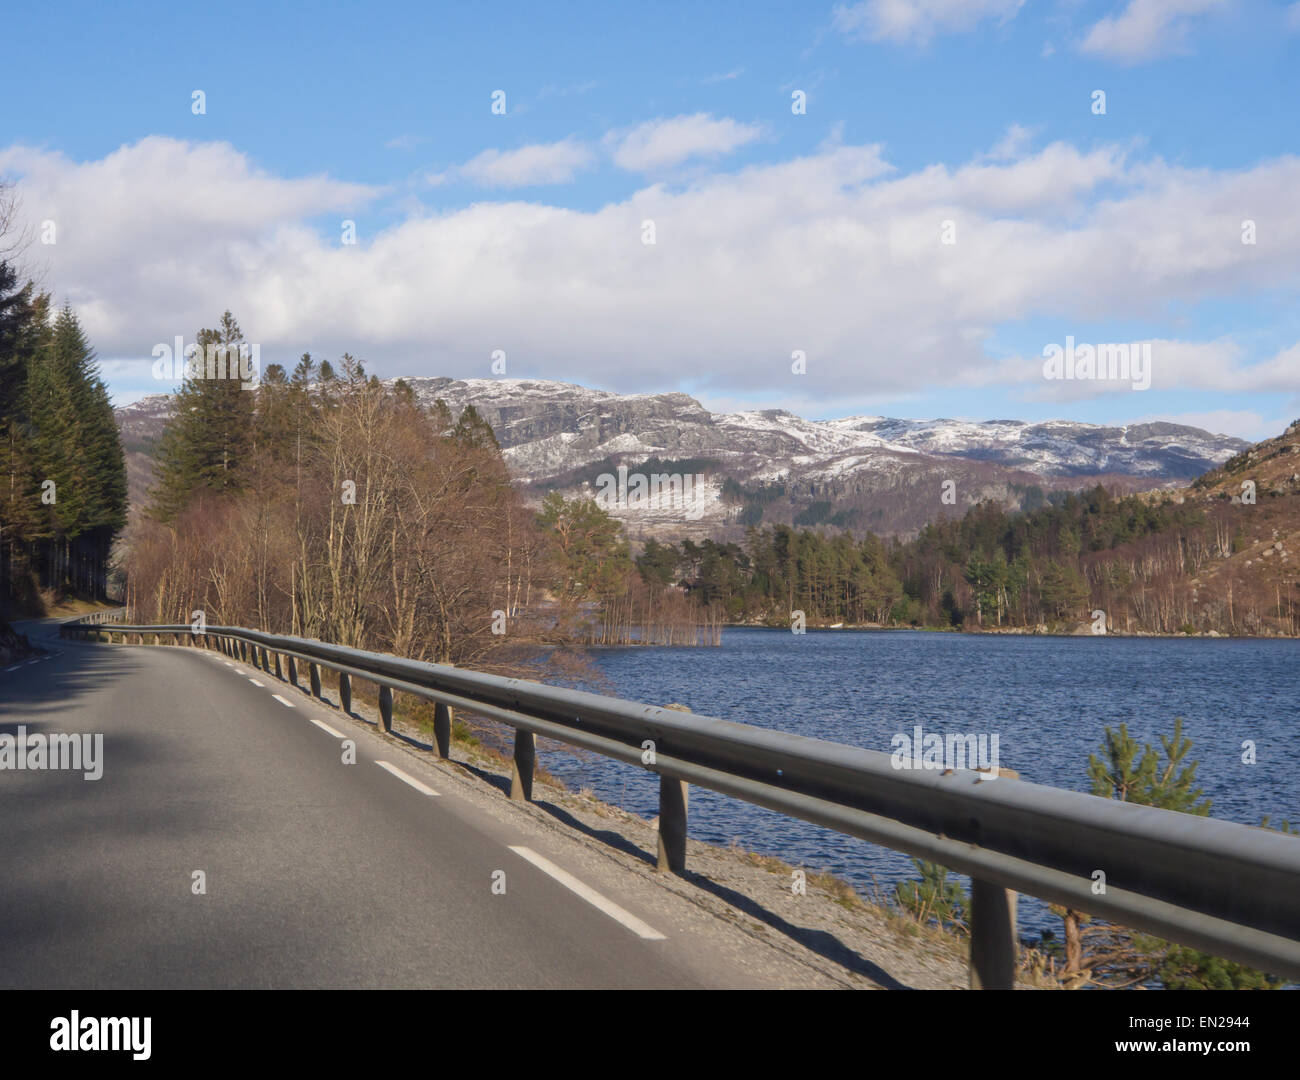 On the road in Ryfylke in the Norwegian fjords, early springtime, water, woods and mountains Stock Photo